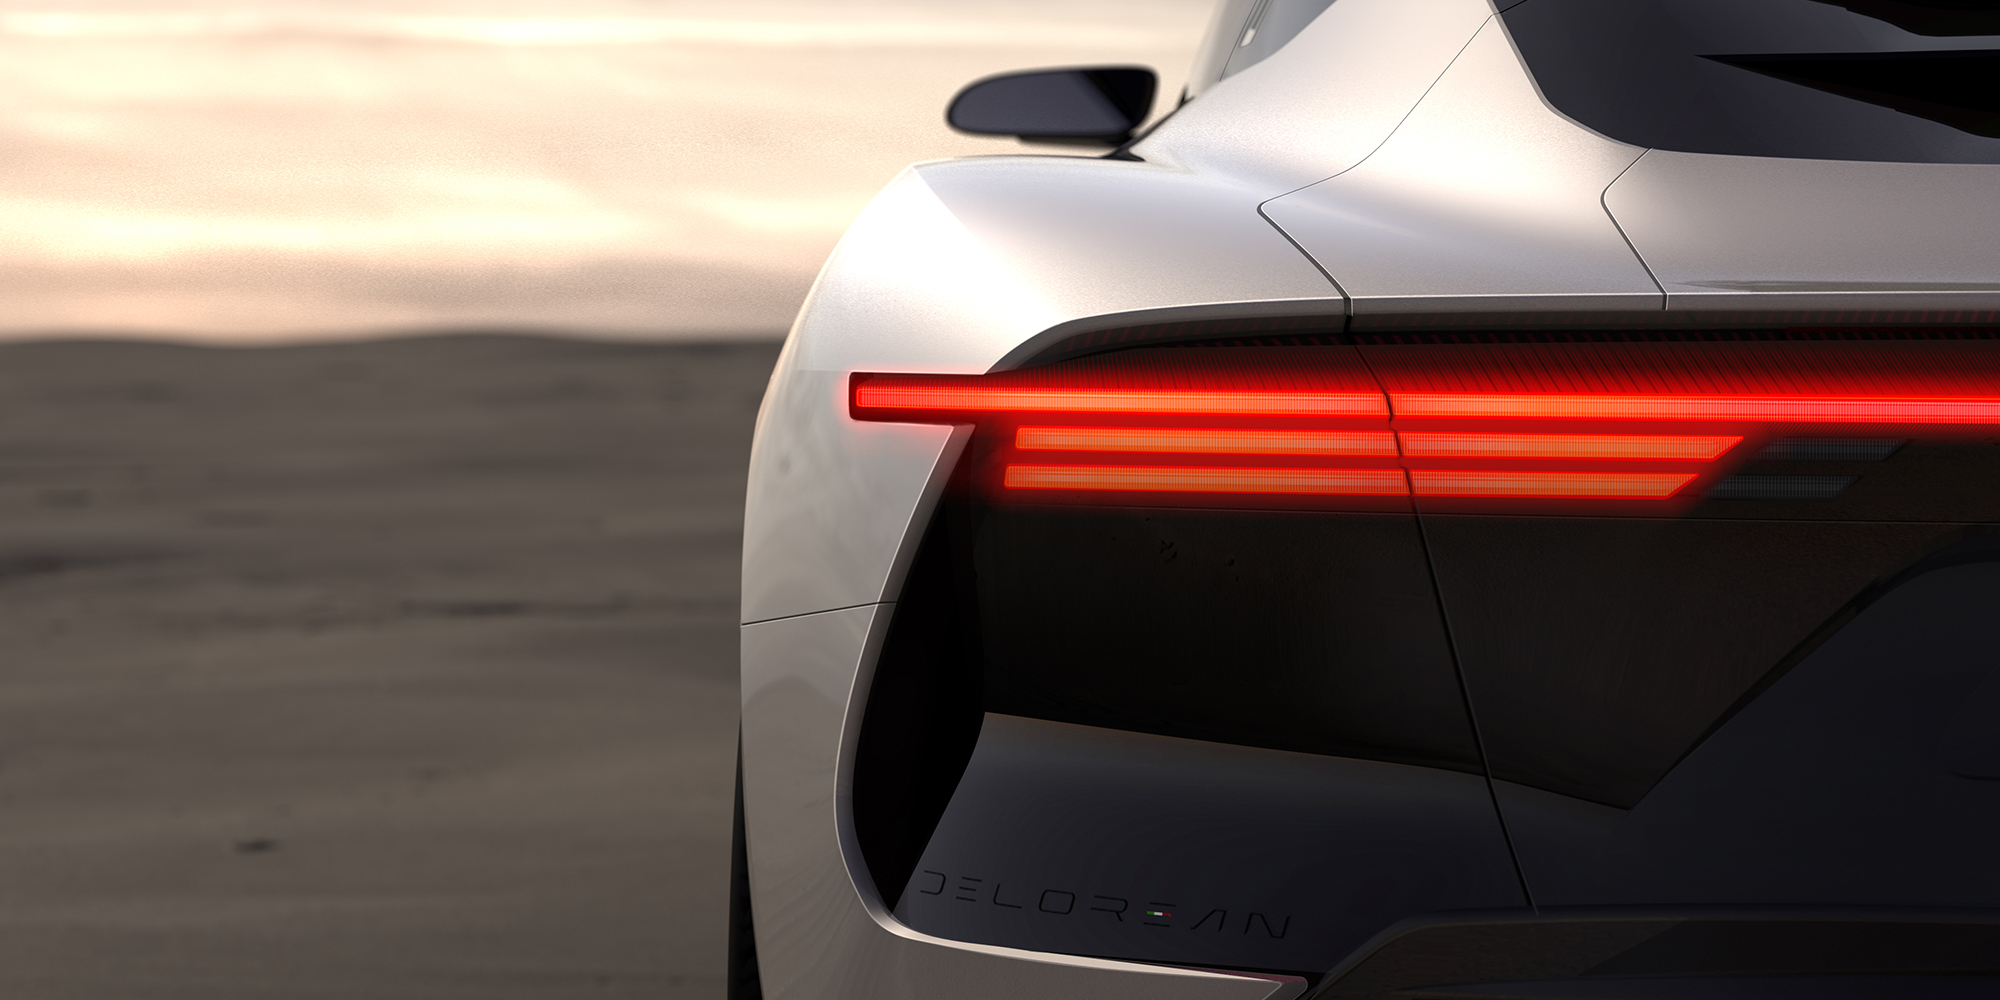 DeLorean Company teases reveal date and sleek of its gull-winged EV, divulges a full line of new models [Update] Electrek